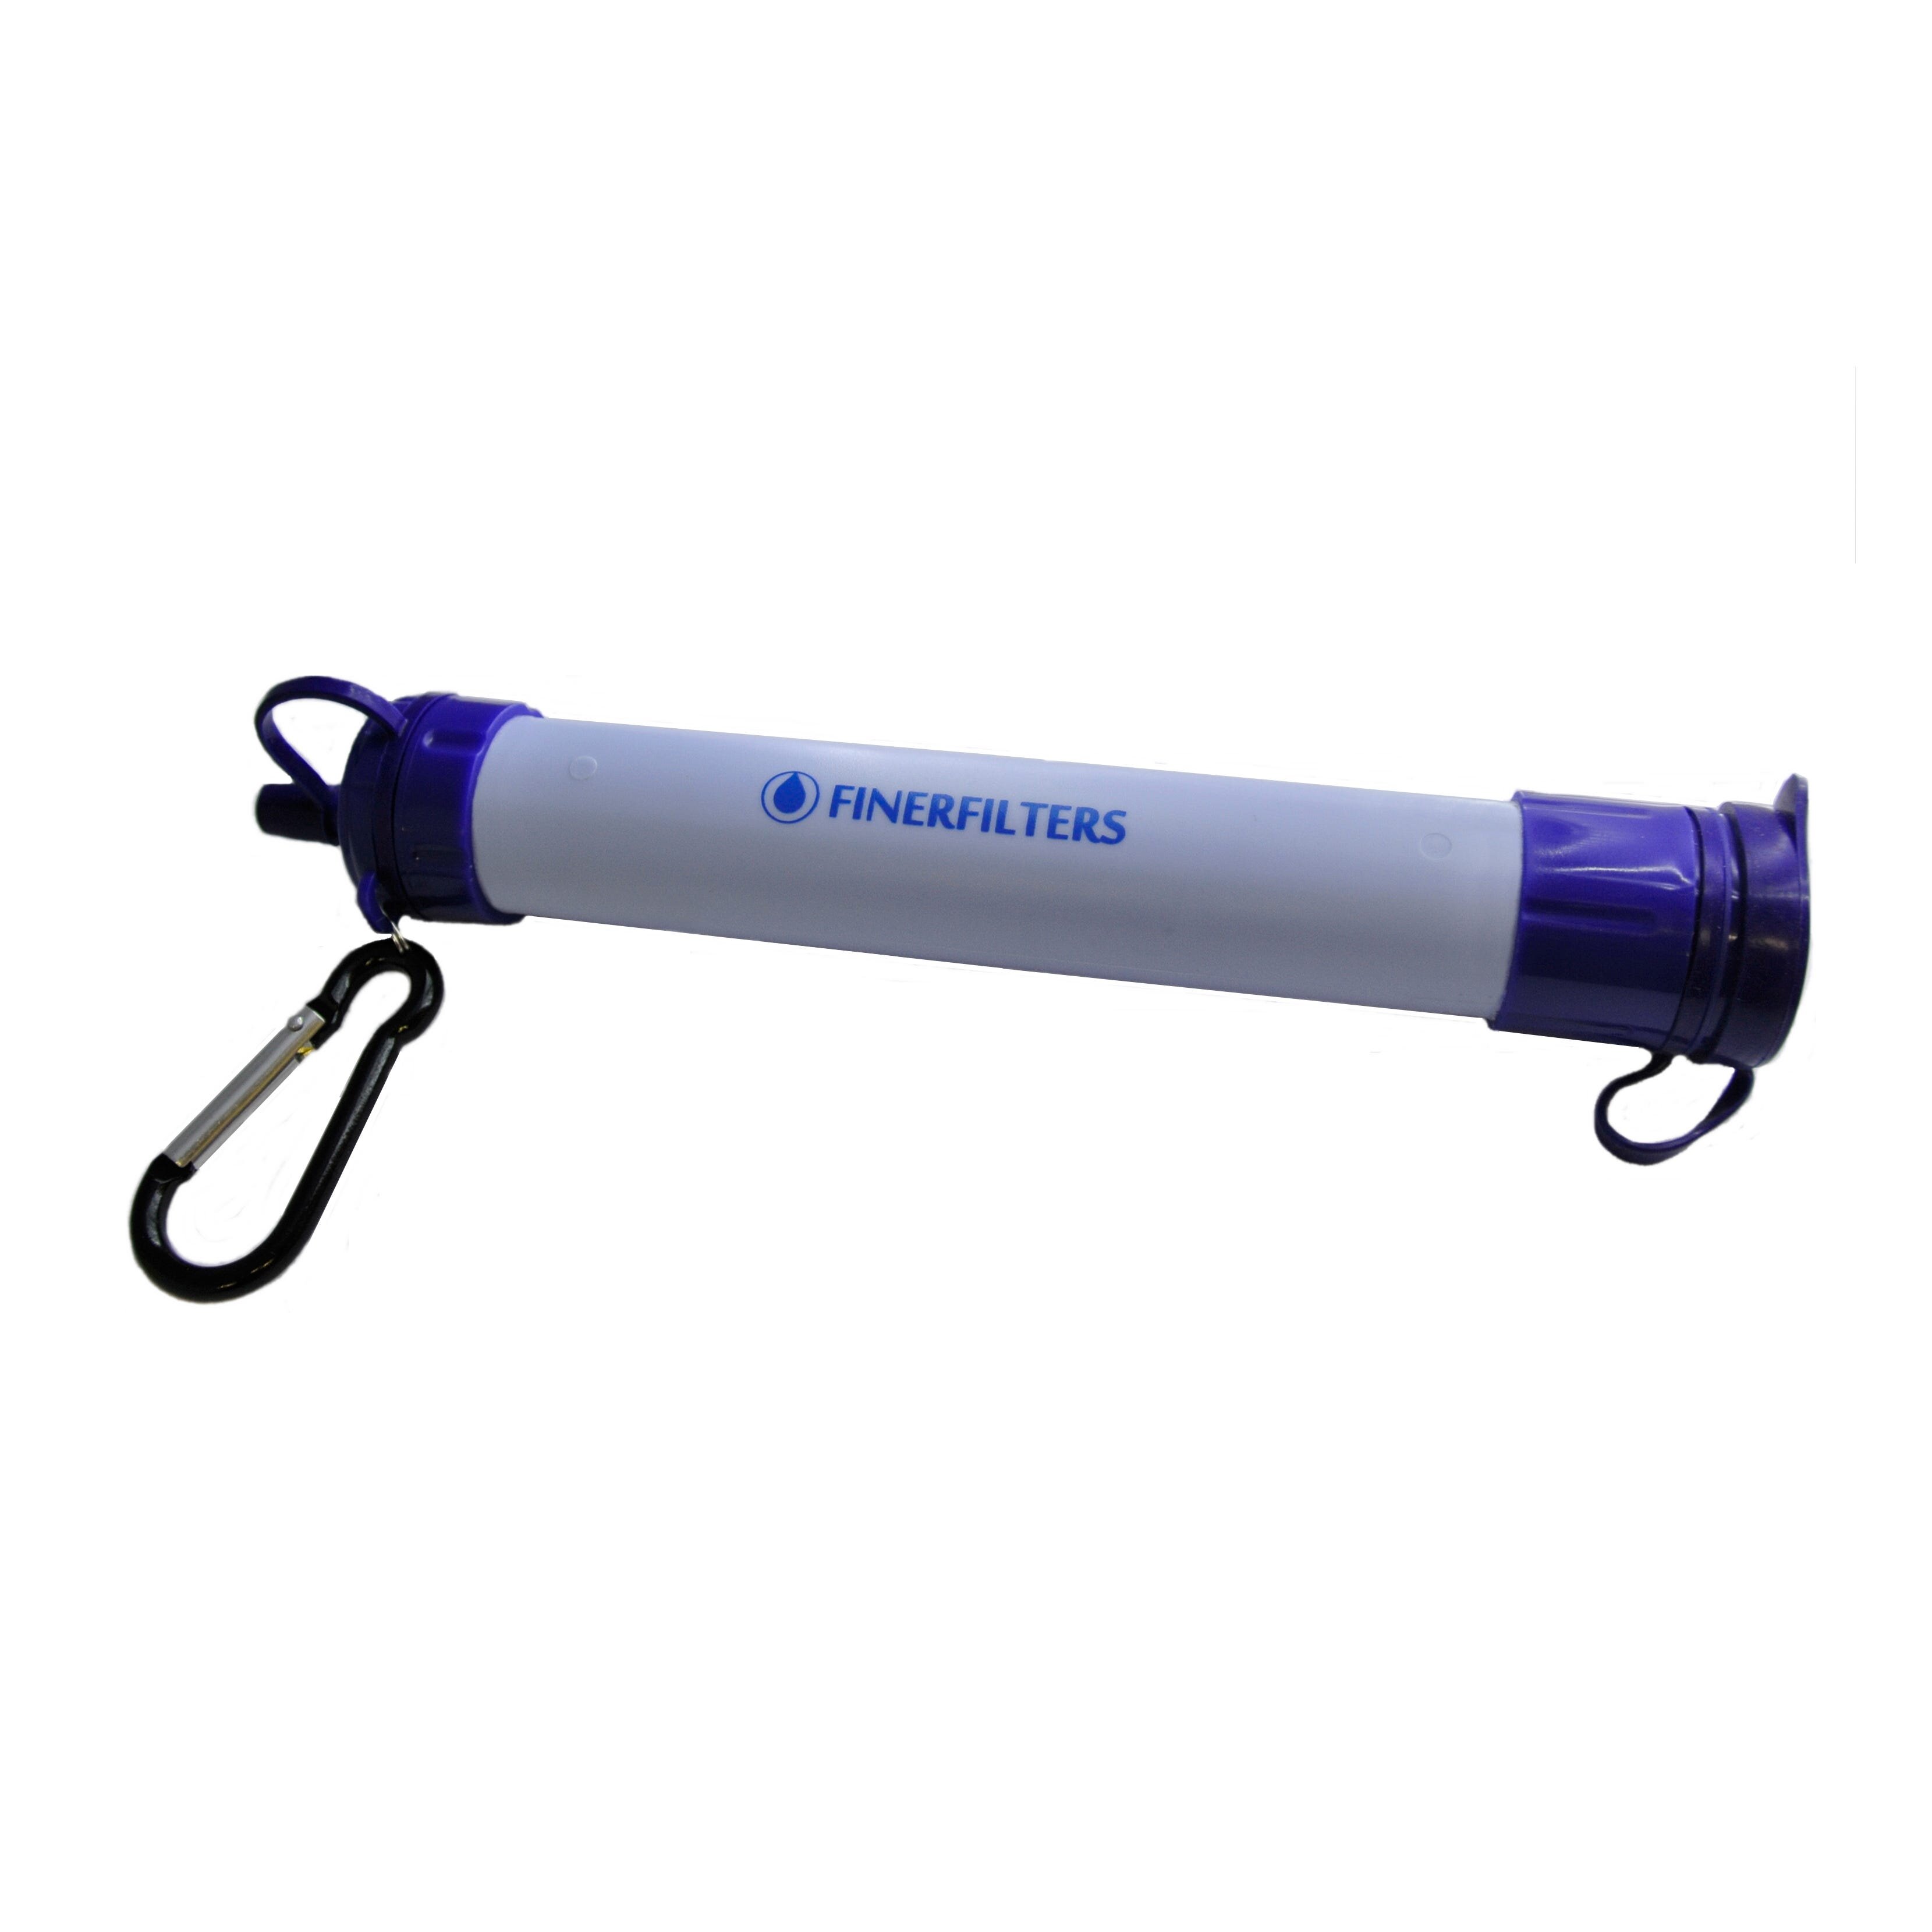 Personal Portable Water Filter Straw 3000L - Microbiological Water Purification filter, Ideal For Camping & Hiking etc.